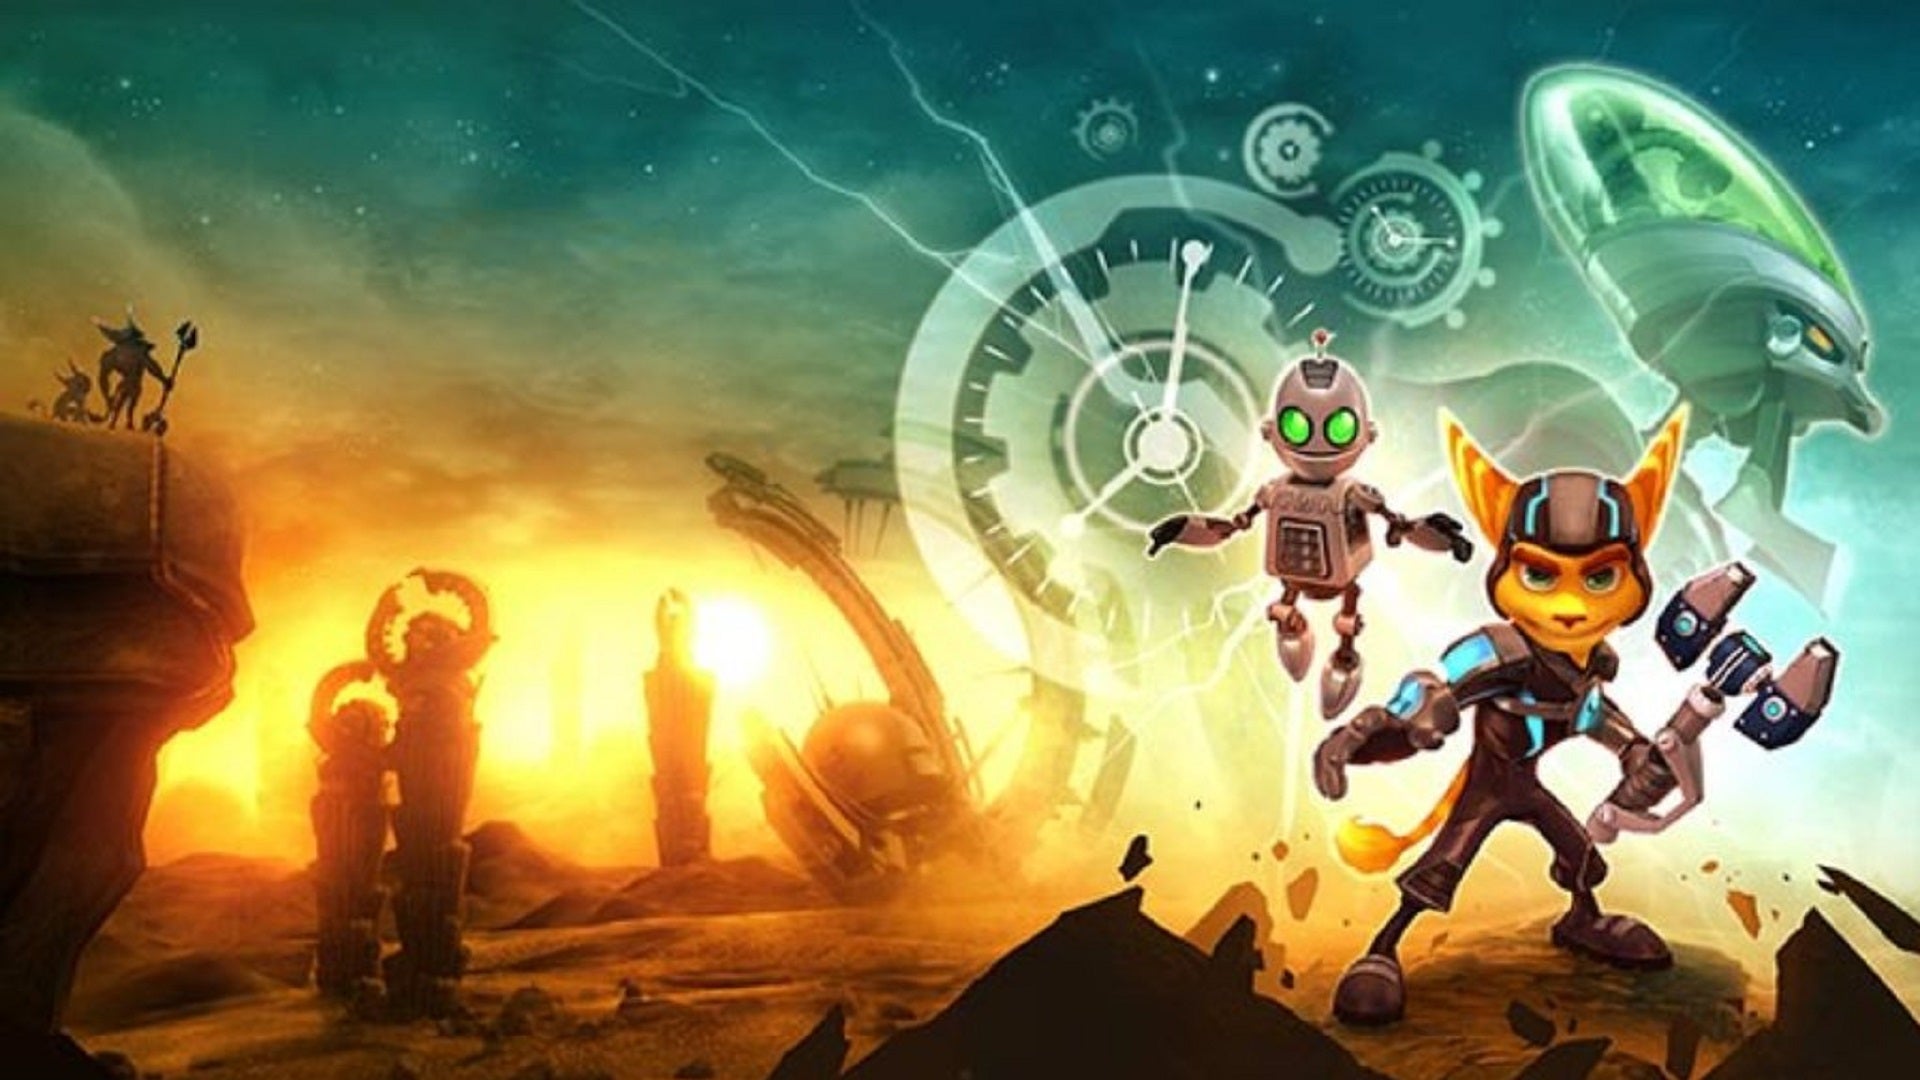 Ratchet & Clank: A Crack In Time official art